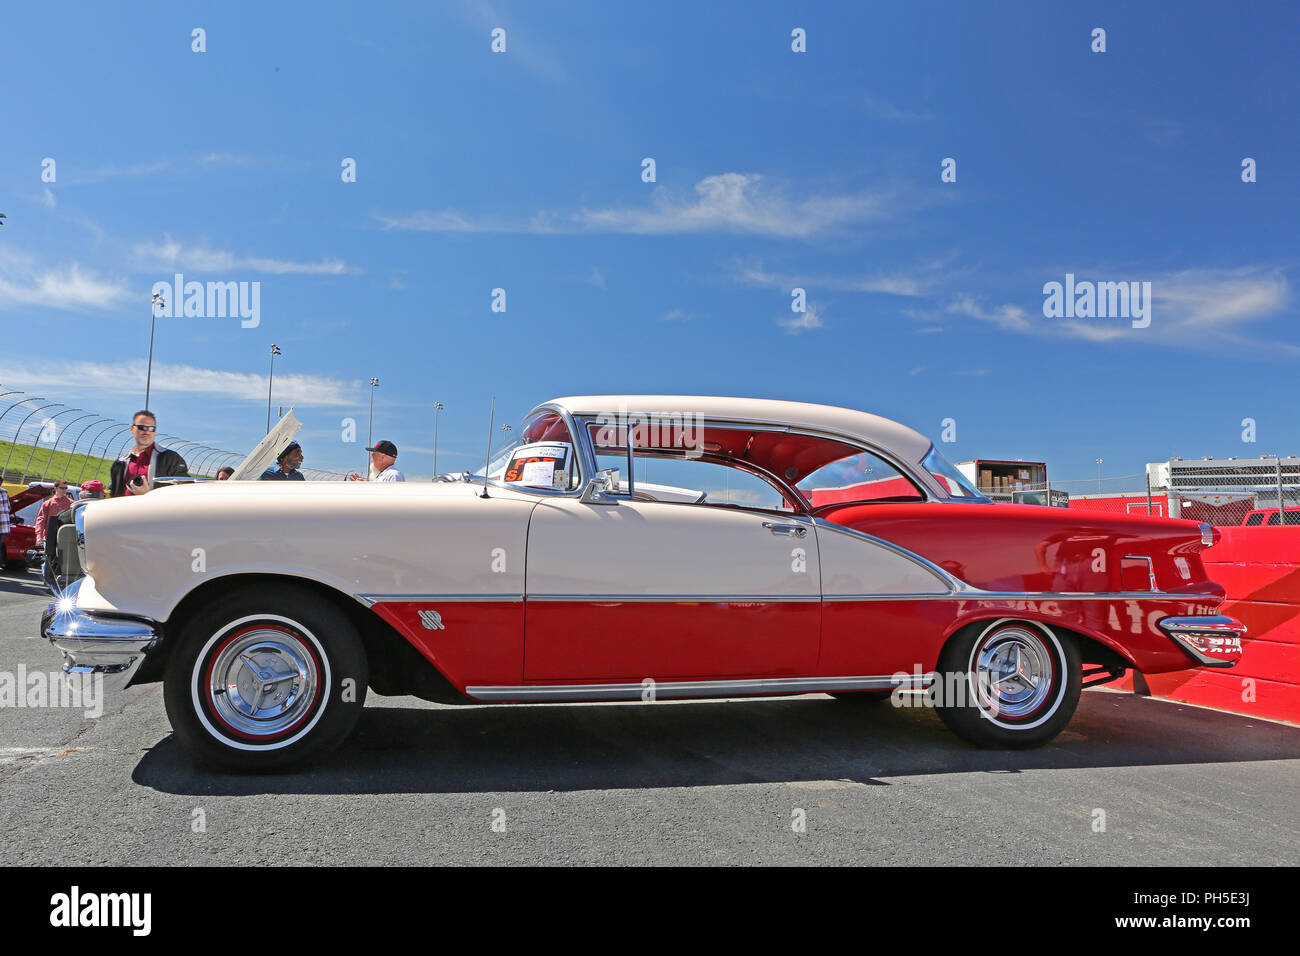 CONCORD, NC — April 8, 2017:  A 1956 Oldsmobile 88 automobile on display at the Pennzoil AutoFair classic car show held at Charlotte Motor Speedway. Stock Photo